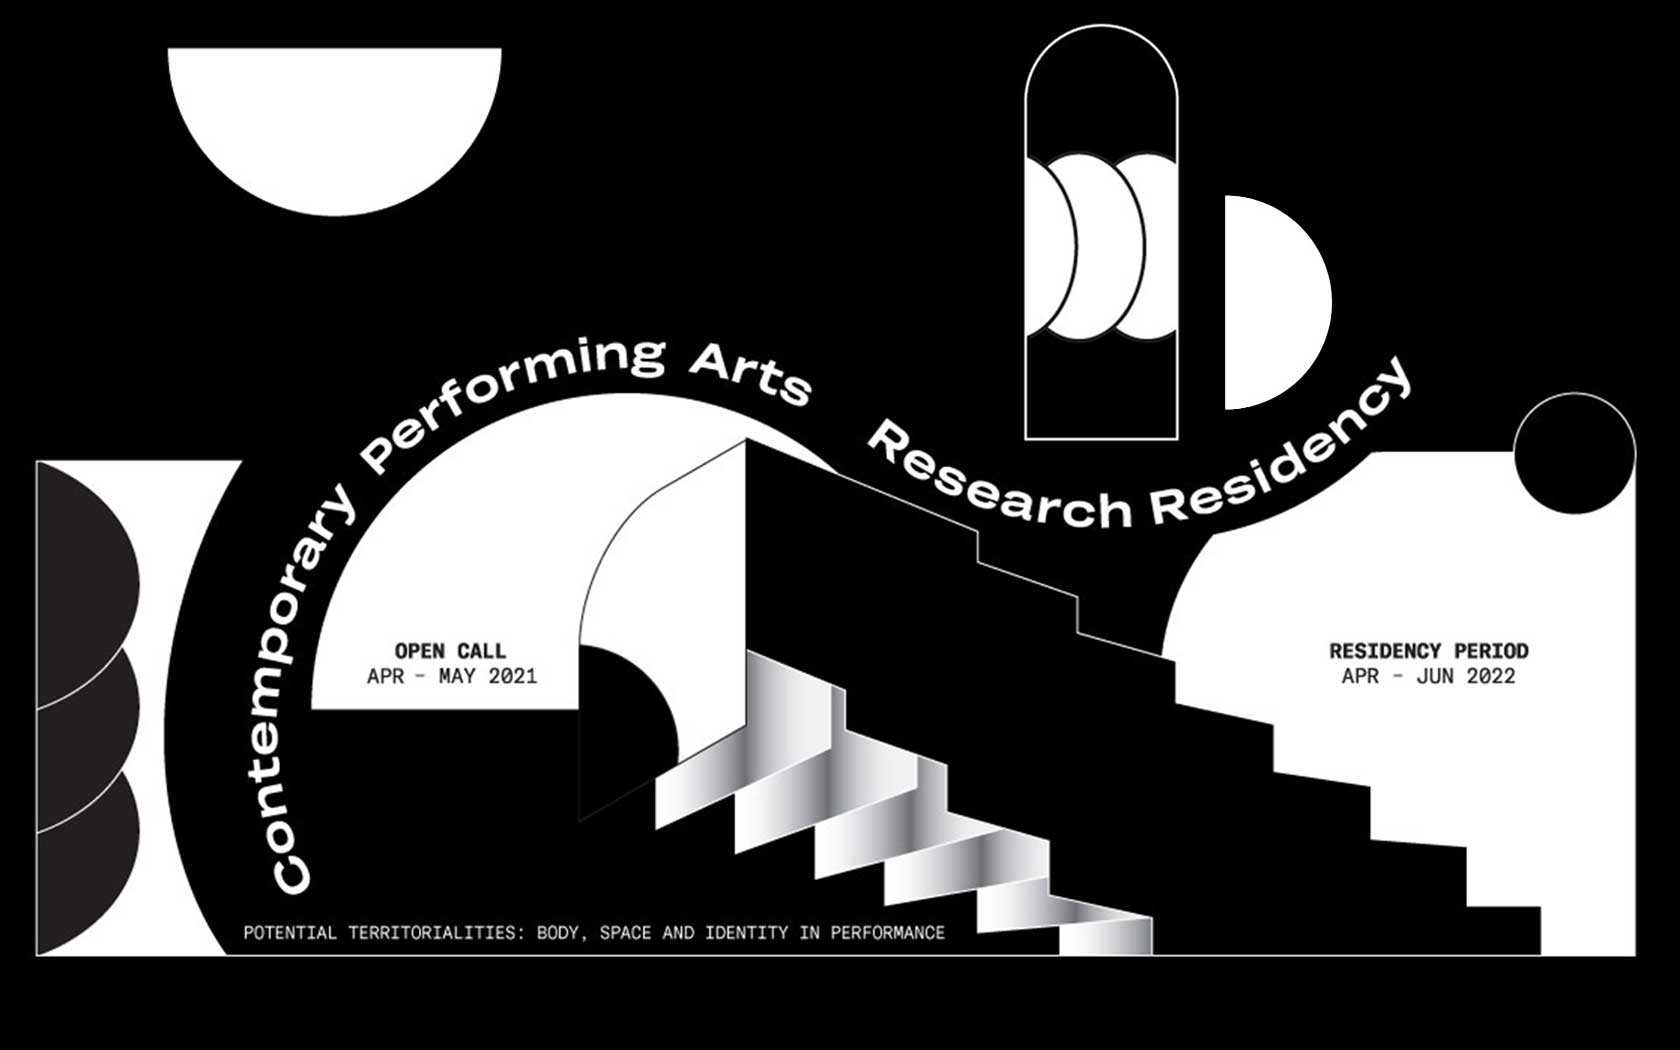 Illustration of the visual for the Contemporary Performing Arts Research Residency using black and white design elements.